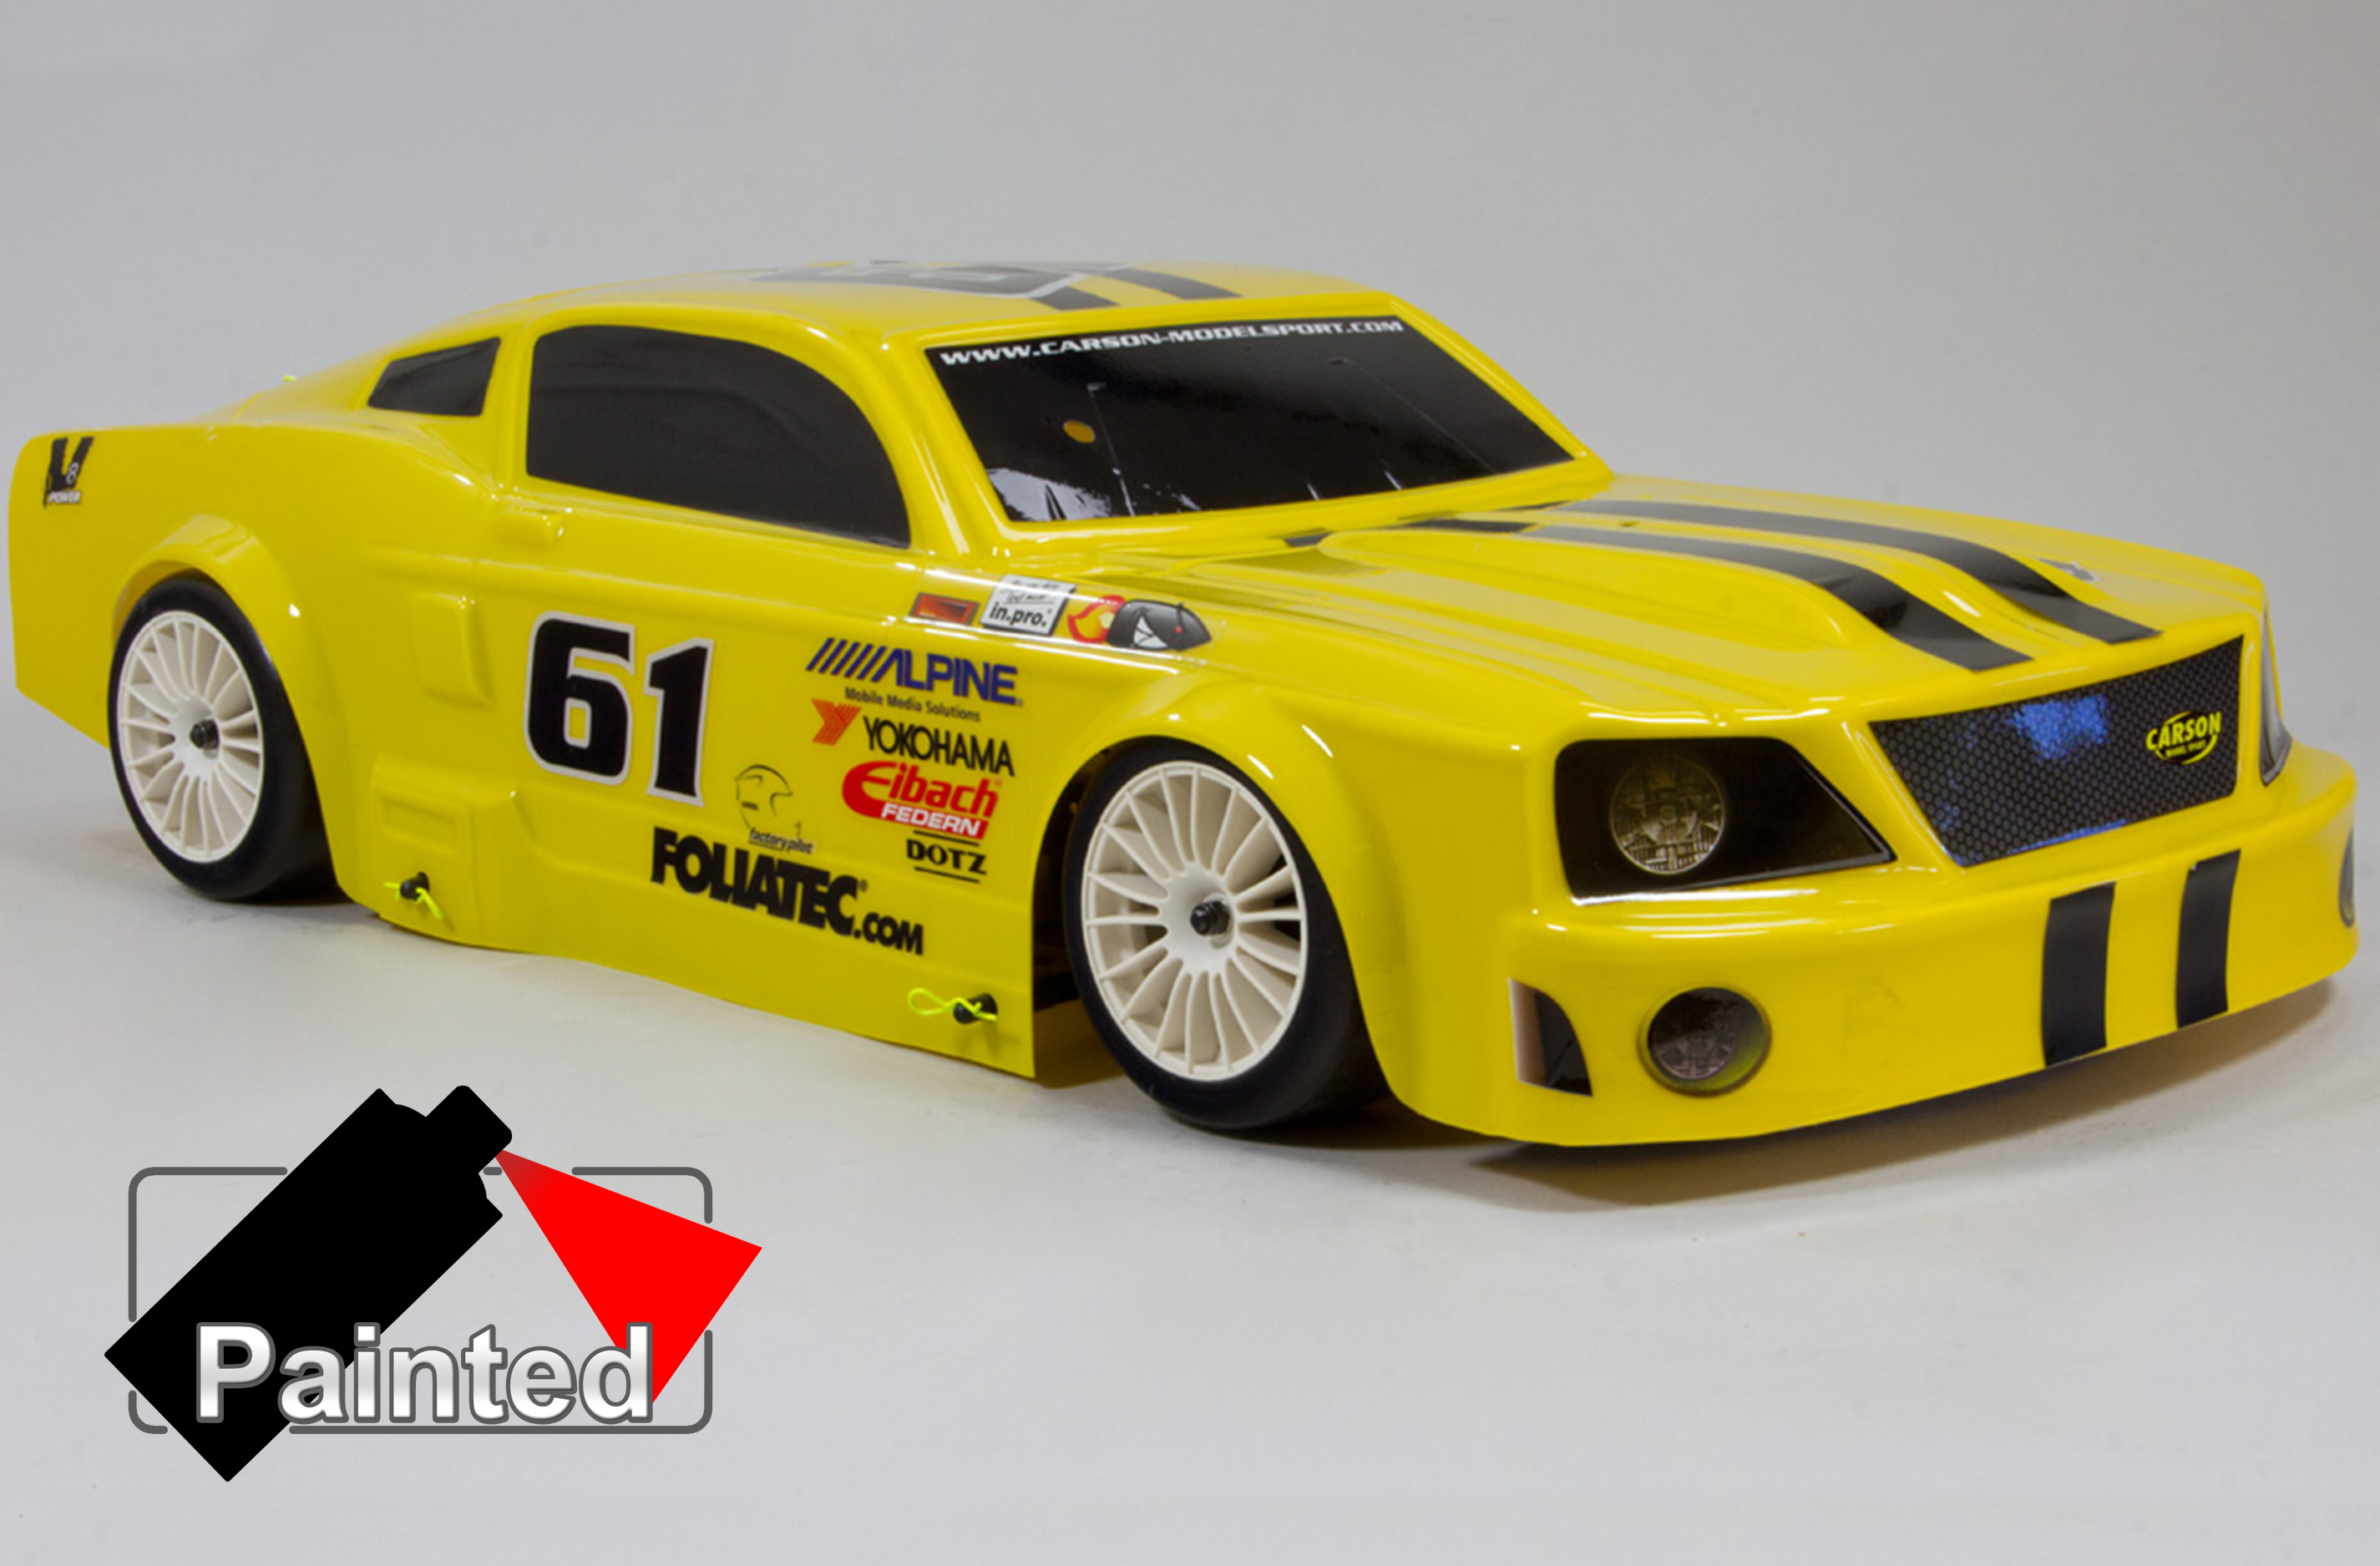 y1080 Painted Ford Mustang body shell 530/535 wheelbase